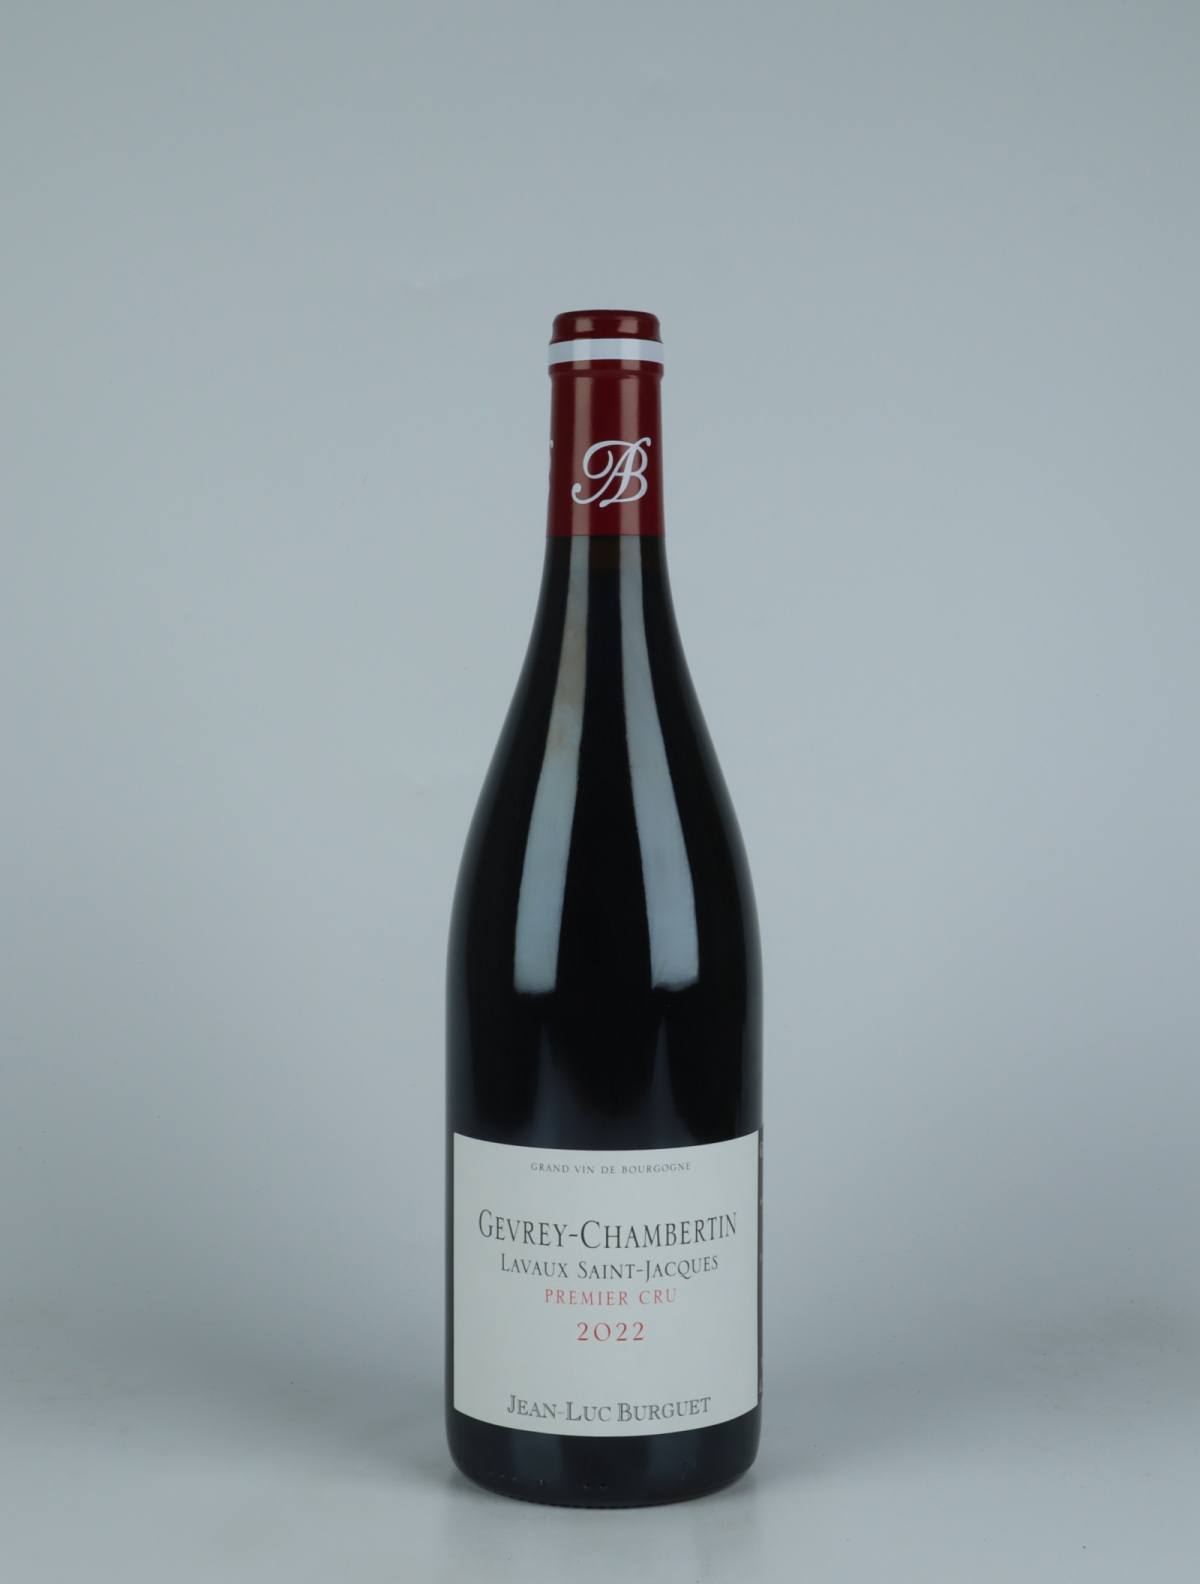 A bottle 2022 Gevrey-Chambertin 1. Cru - Lavaux Saint Jacques Red wine from Jean-Luc & Eric Burguet, Burgundy in France